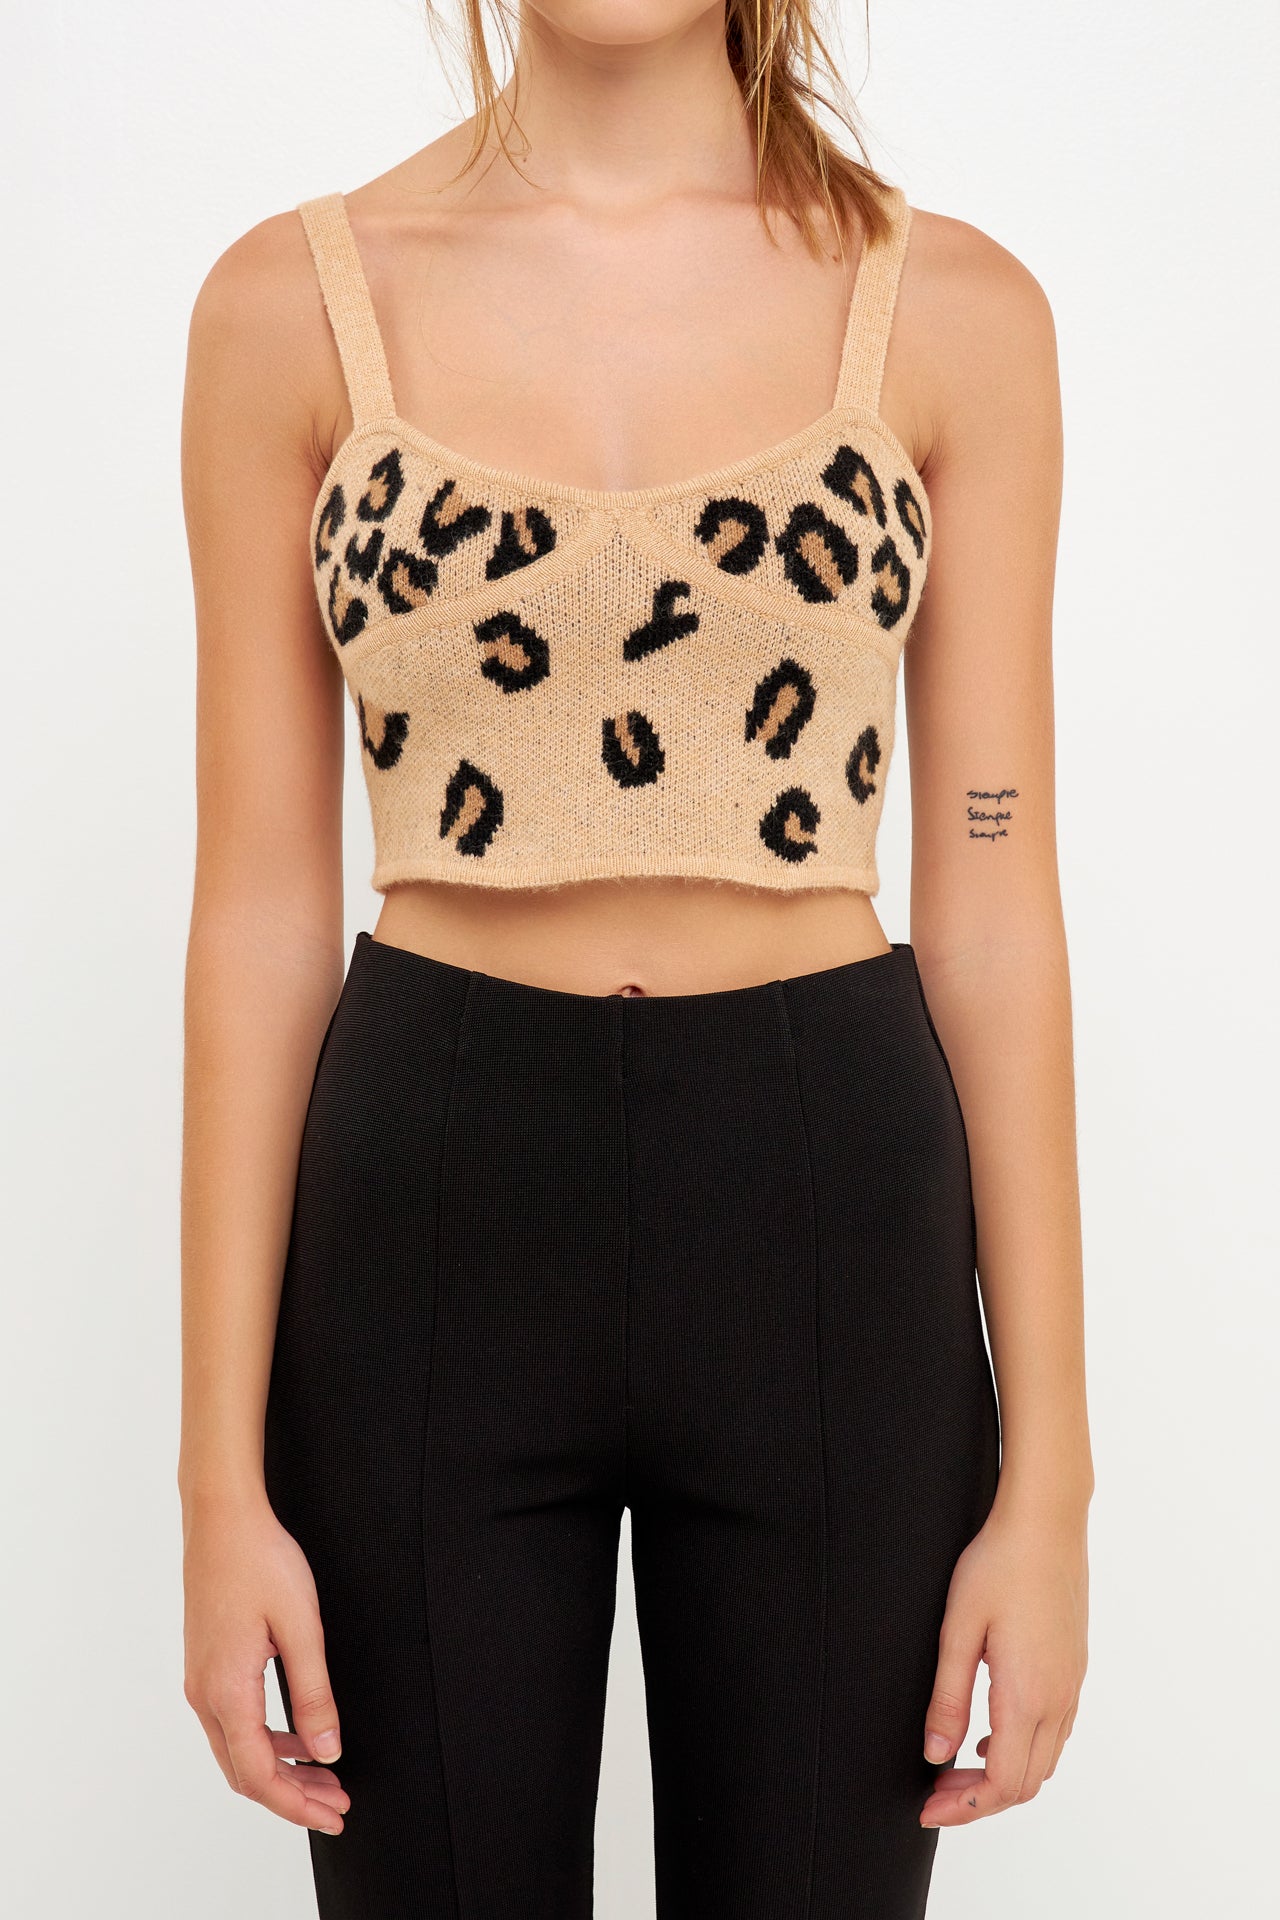 GREY LAB-Leopard Bustier Knit-CAMI TOPS & TANK available at Objectrare